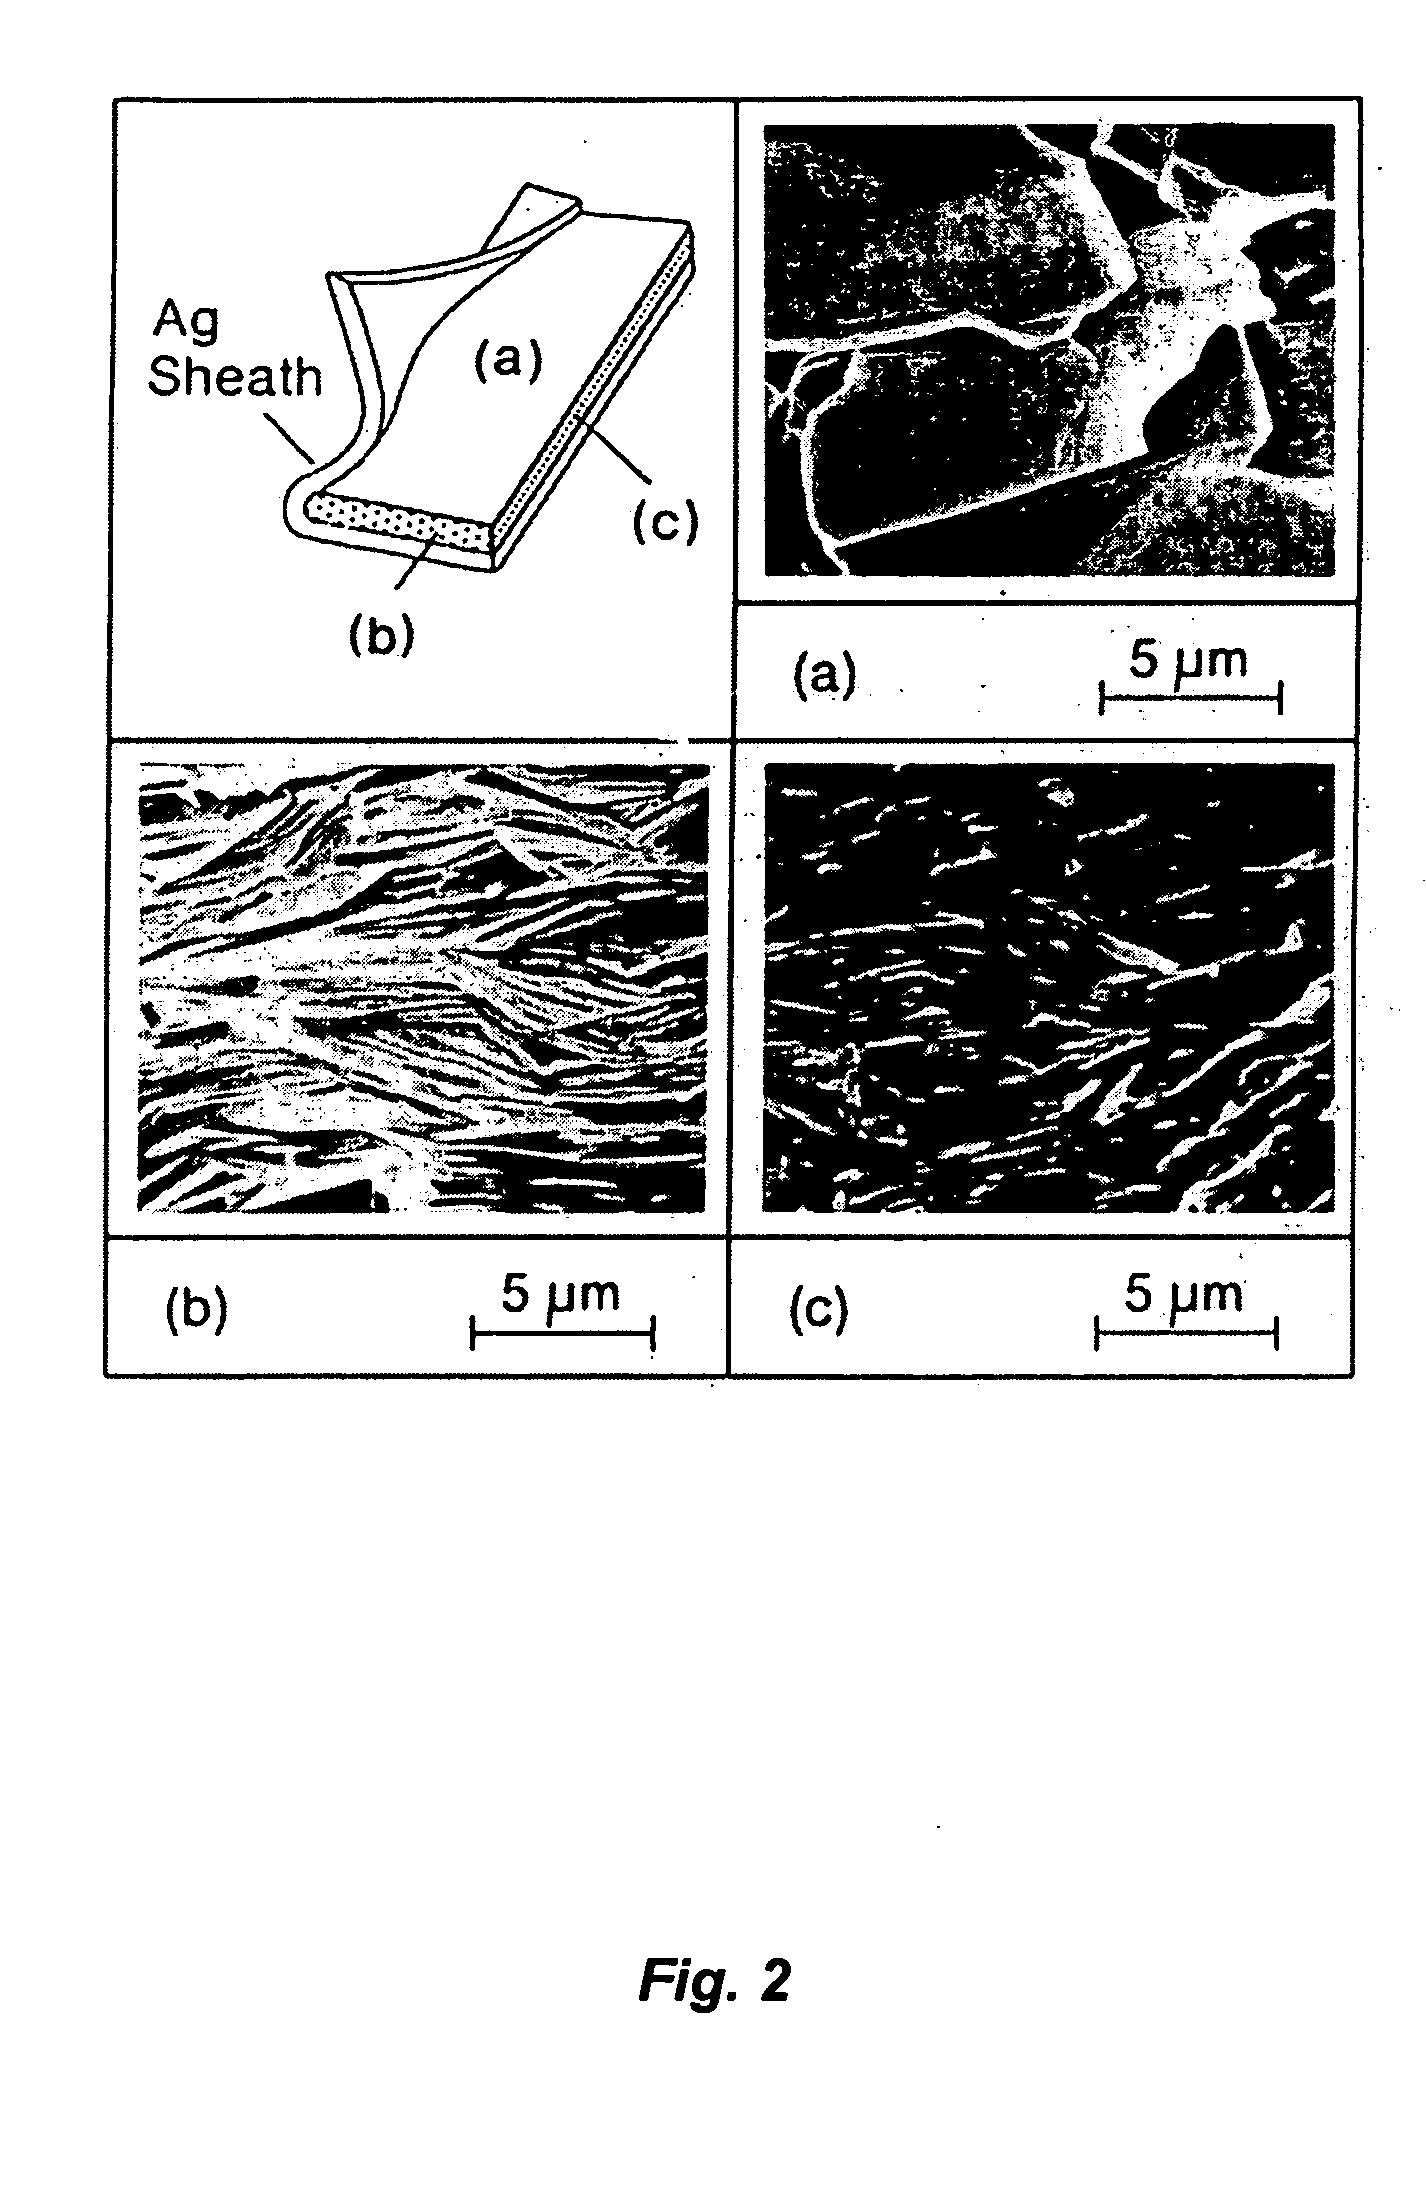 Superconductors and methods for making such superconductors